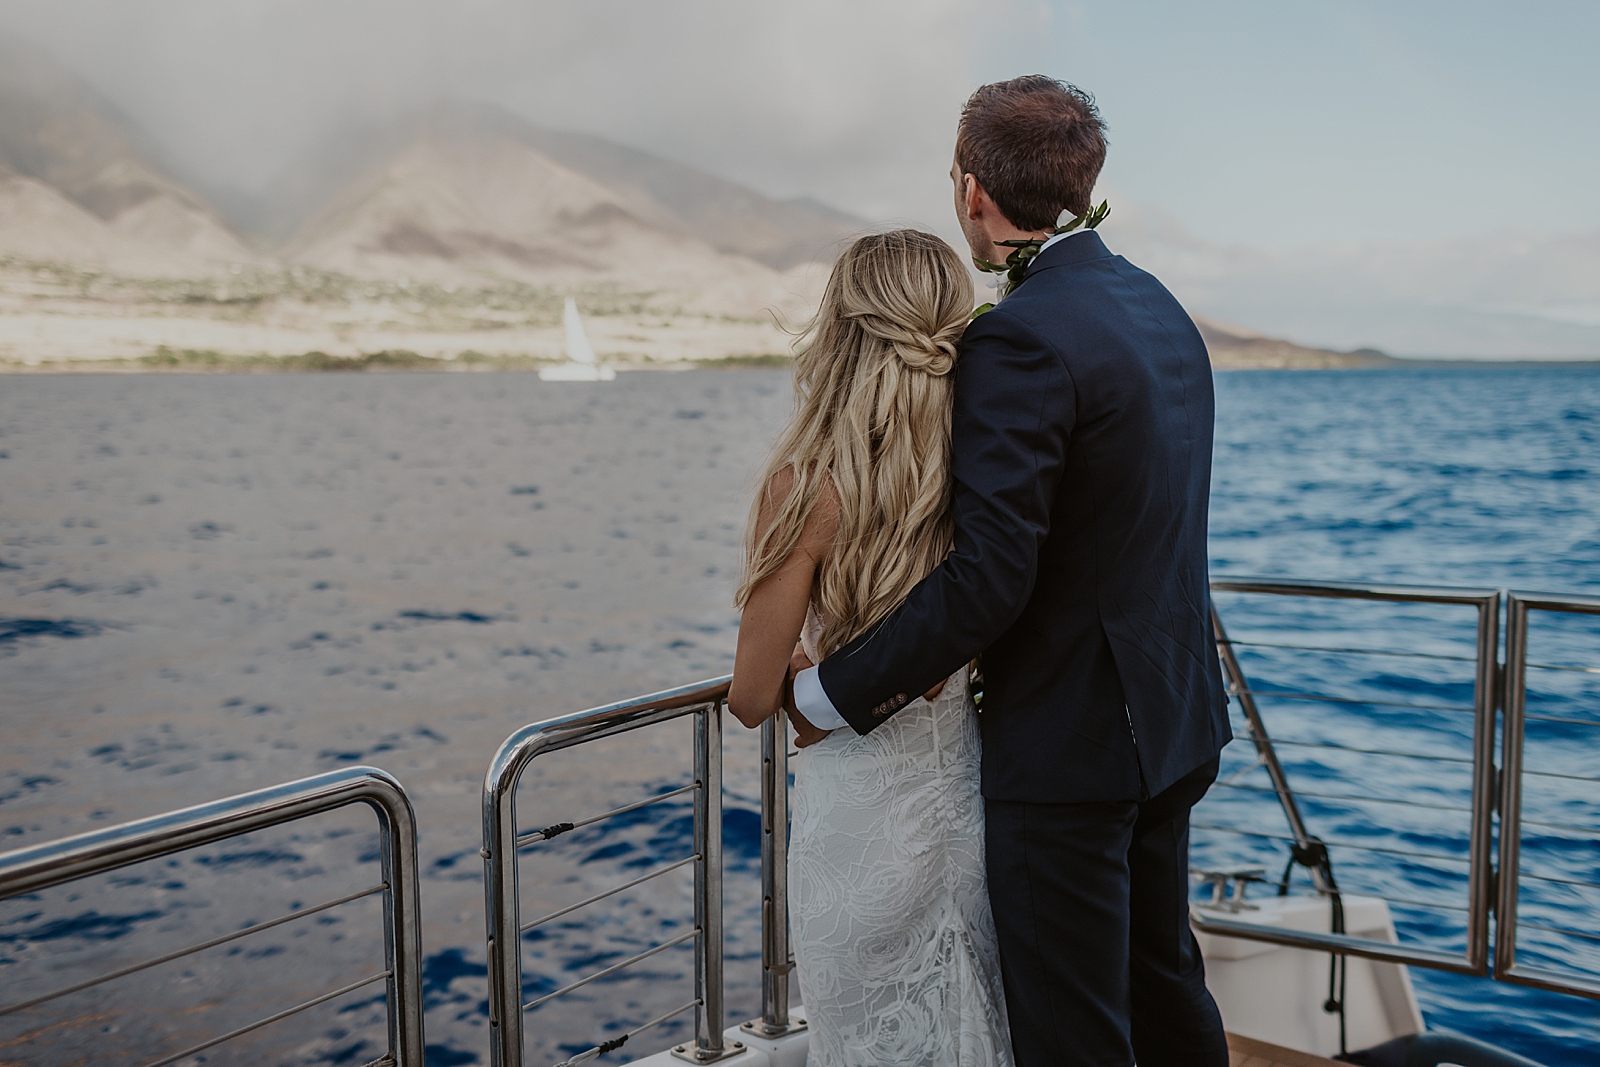 Groom holding Bride and both of them looking out at the land while out on a boat